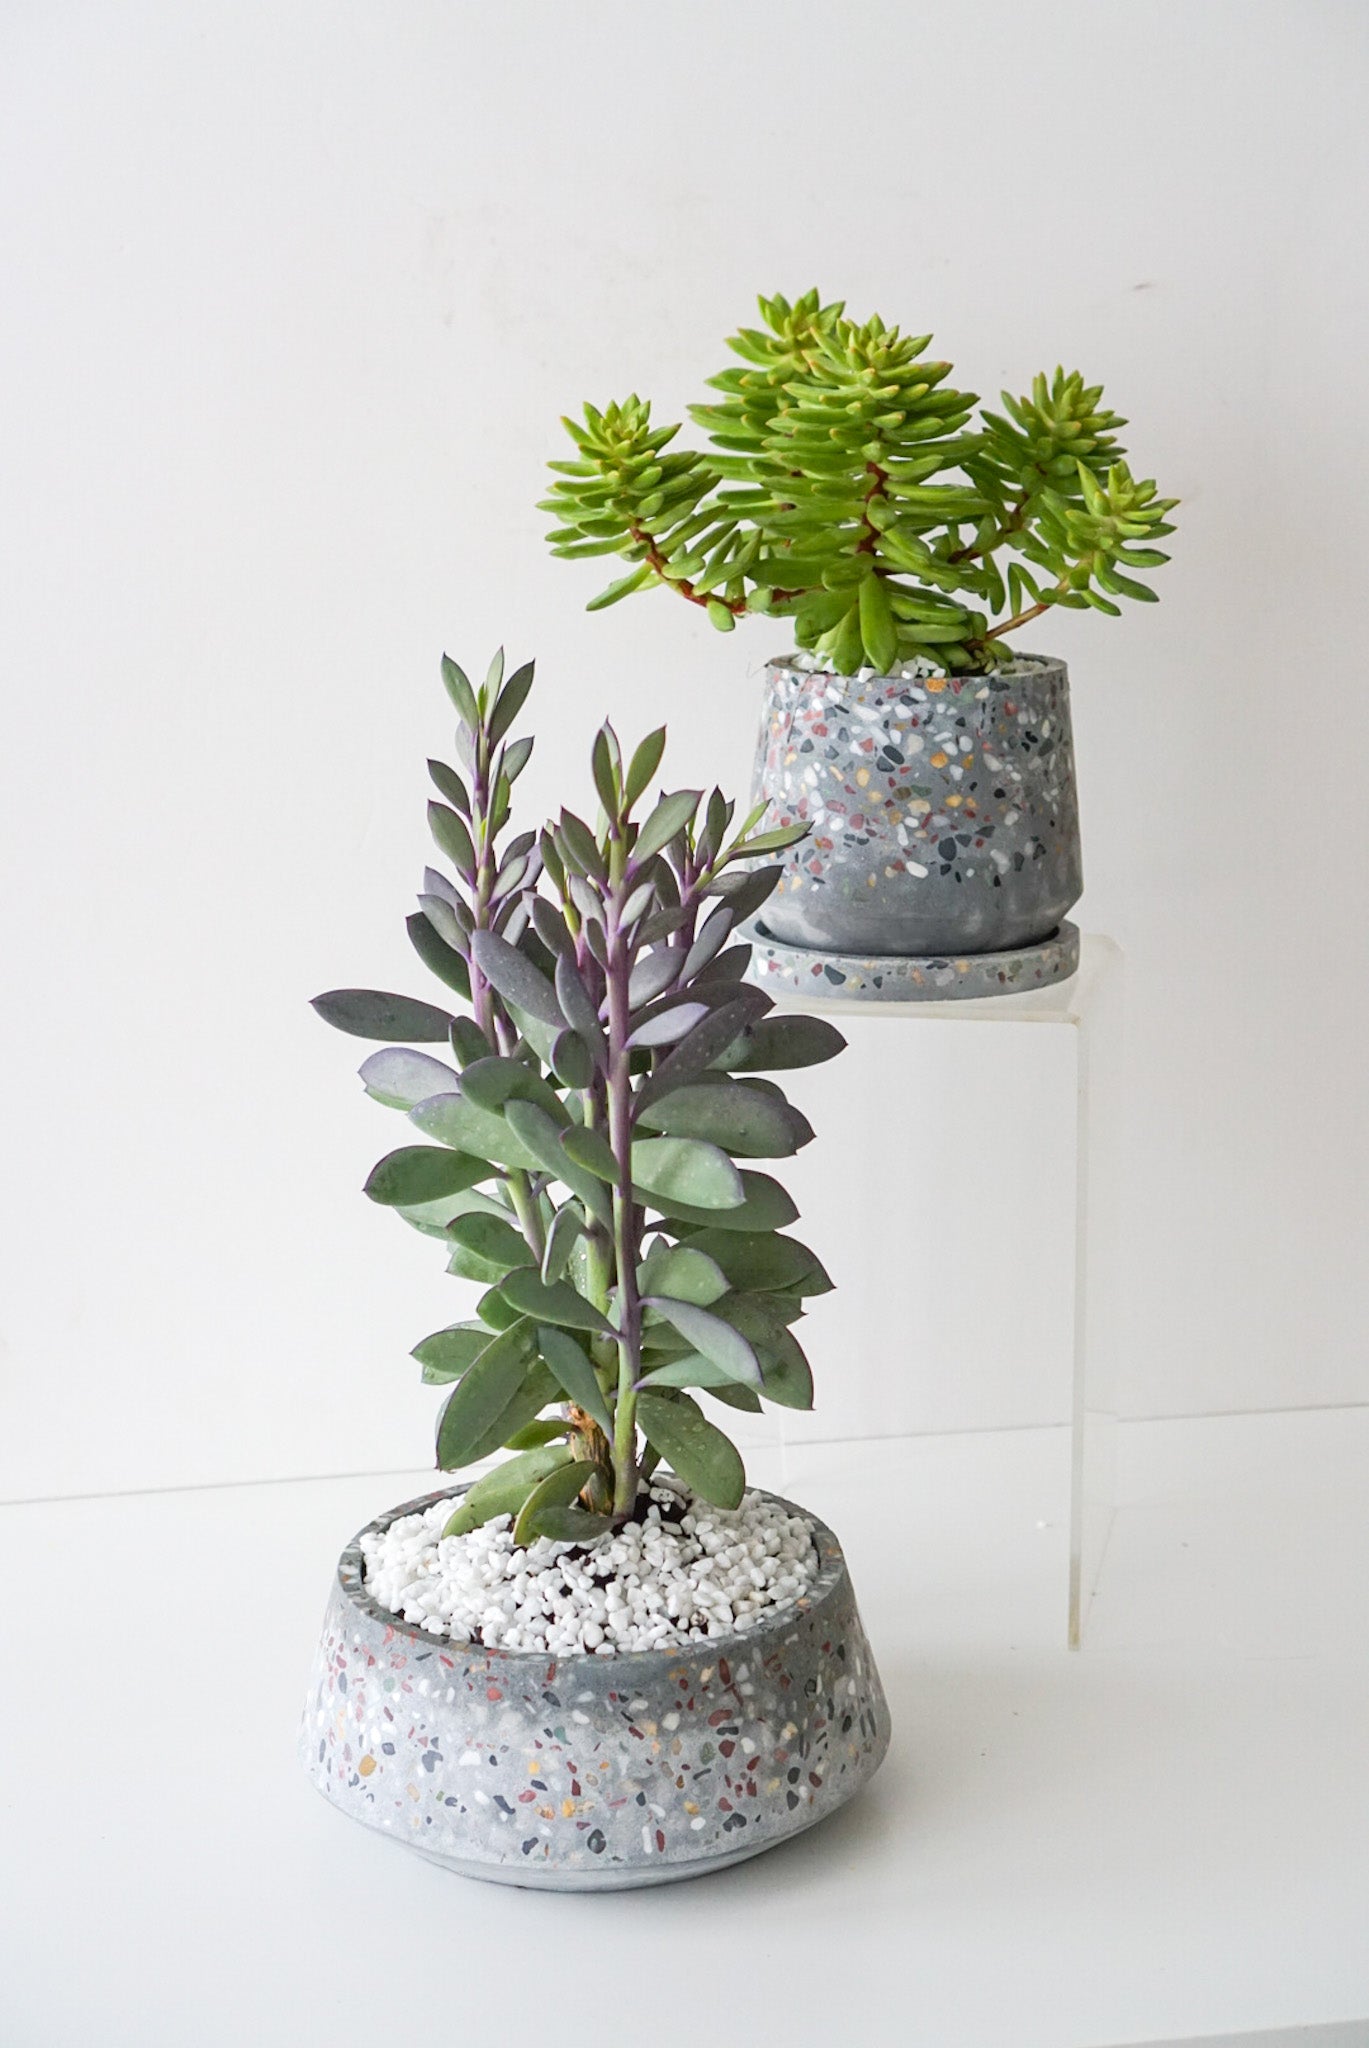 Lavender Steps is common name of Senecio Crassissimus Succulent. Planted in a grey terrazzo 8" x3.25" cement bowl. This succulent has blue-green fleshy leaves with purple margins. Thrives in bright, indirect sunlight. Water the soil when the soil is dry around every 2 weeks, less frequently in winter.